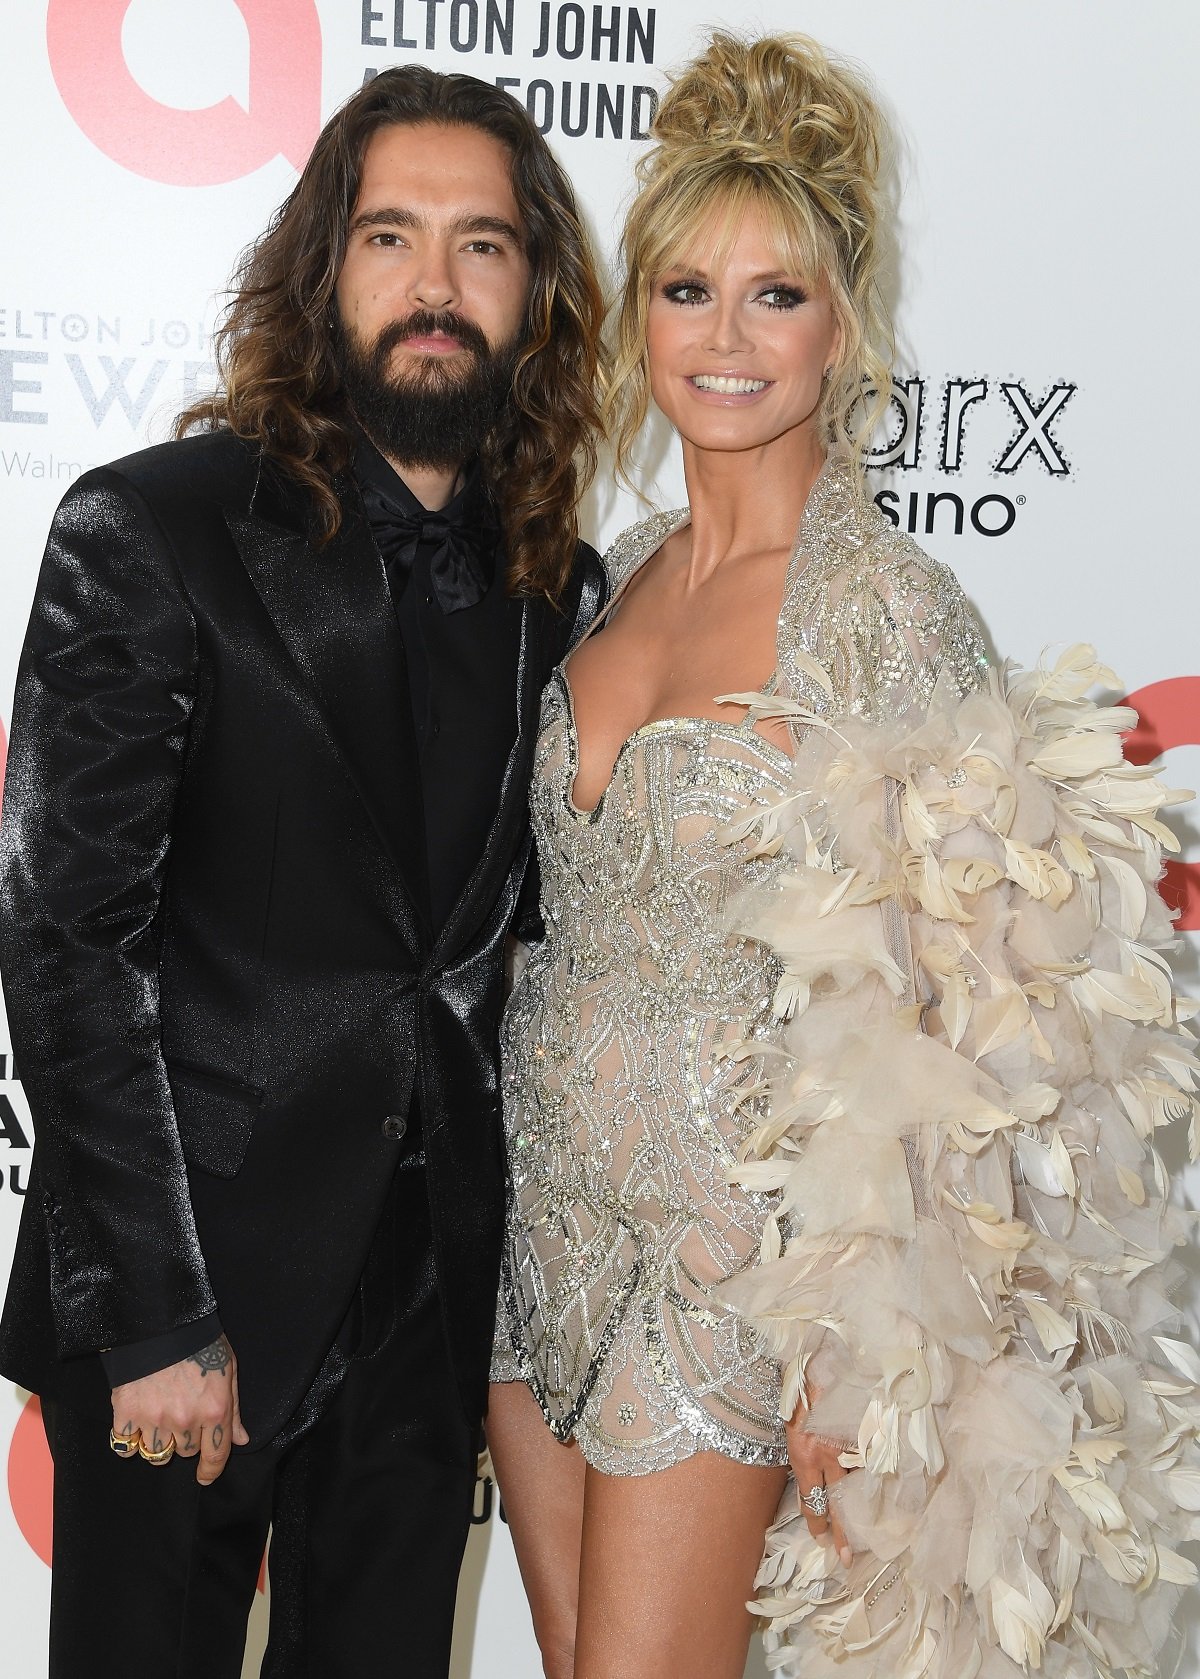 Heidi Klum and Tom Kaulitz pose together on the red carpet at the Elton John AIDS Foundation's Annual Academy Awards Viewing Party